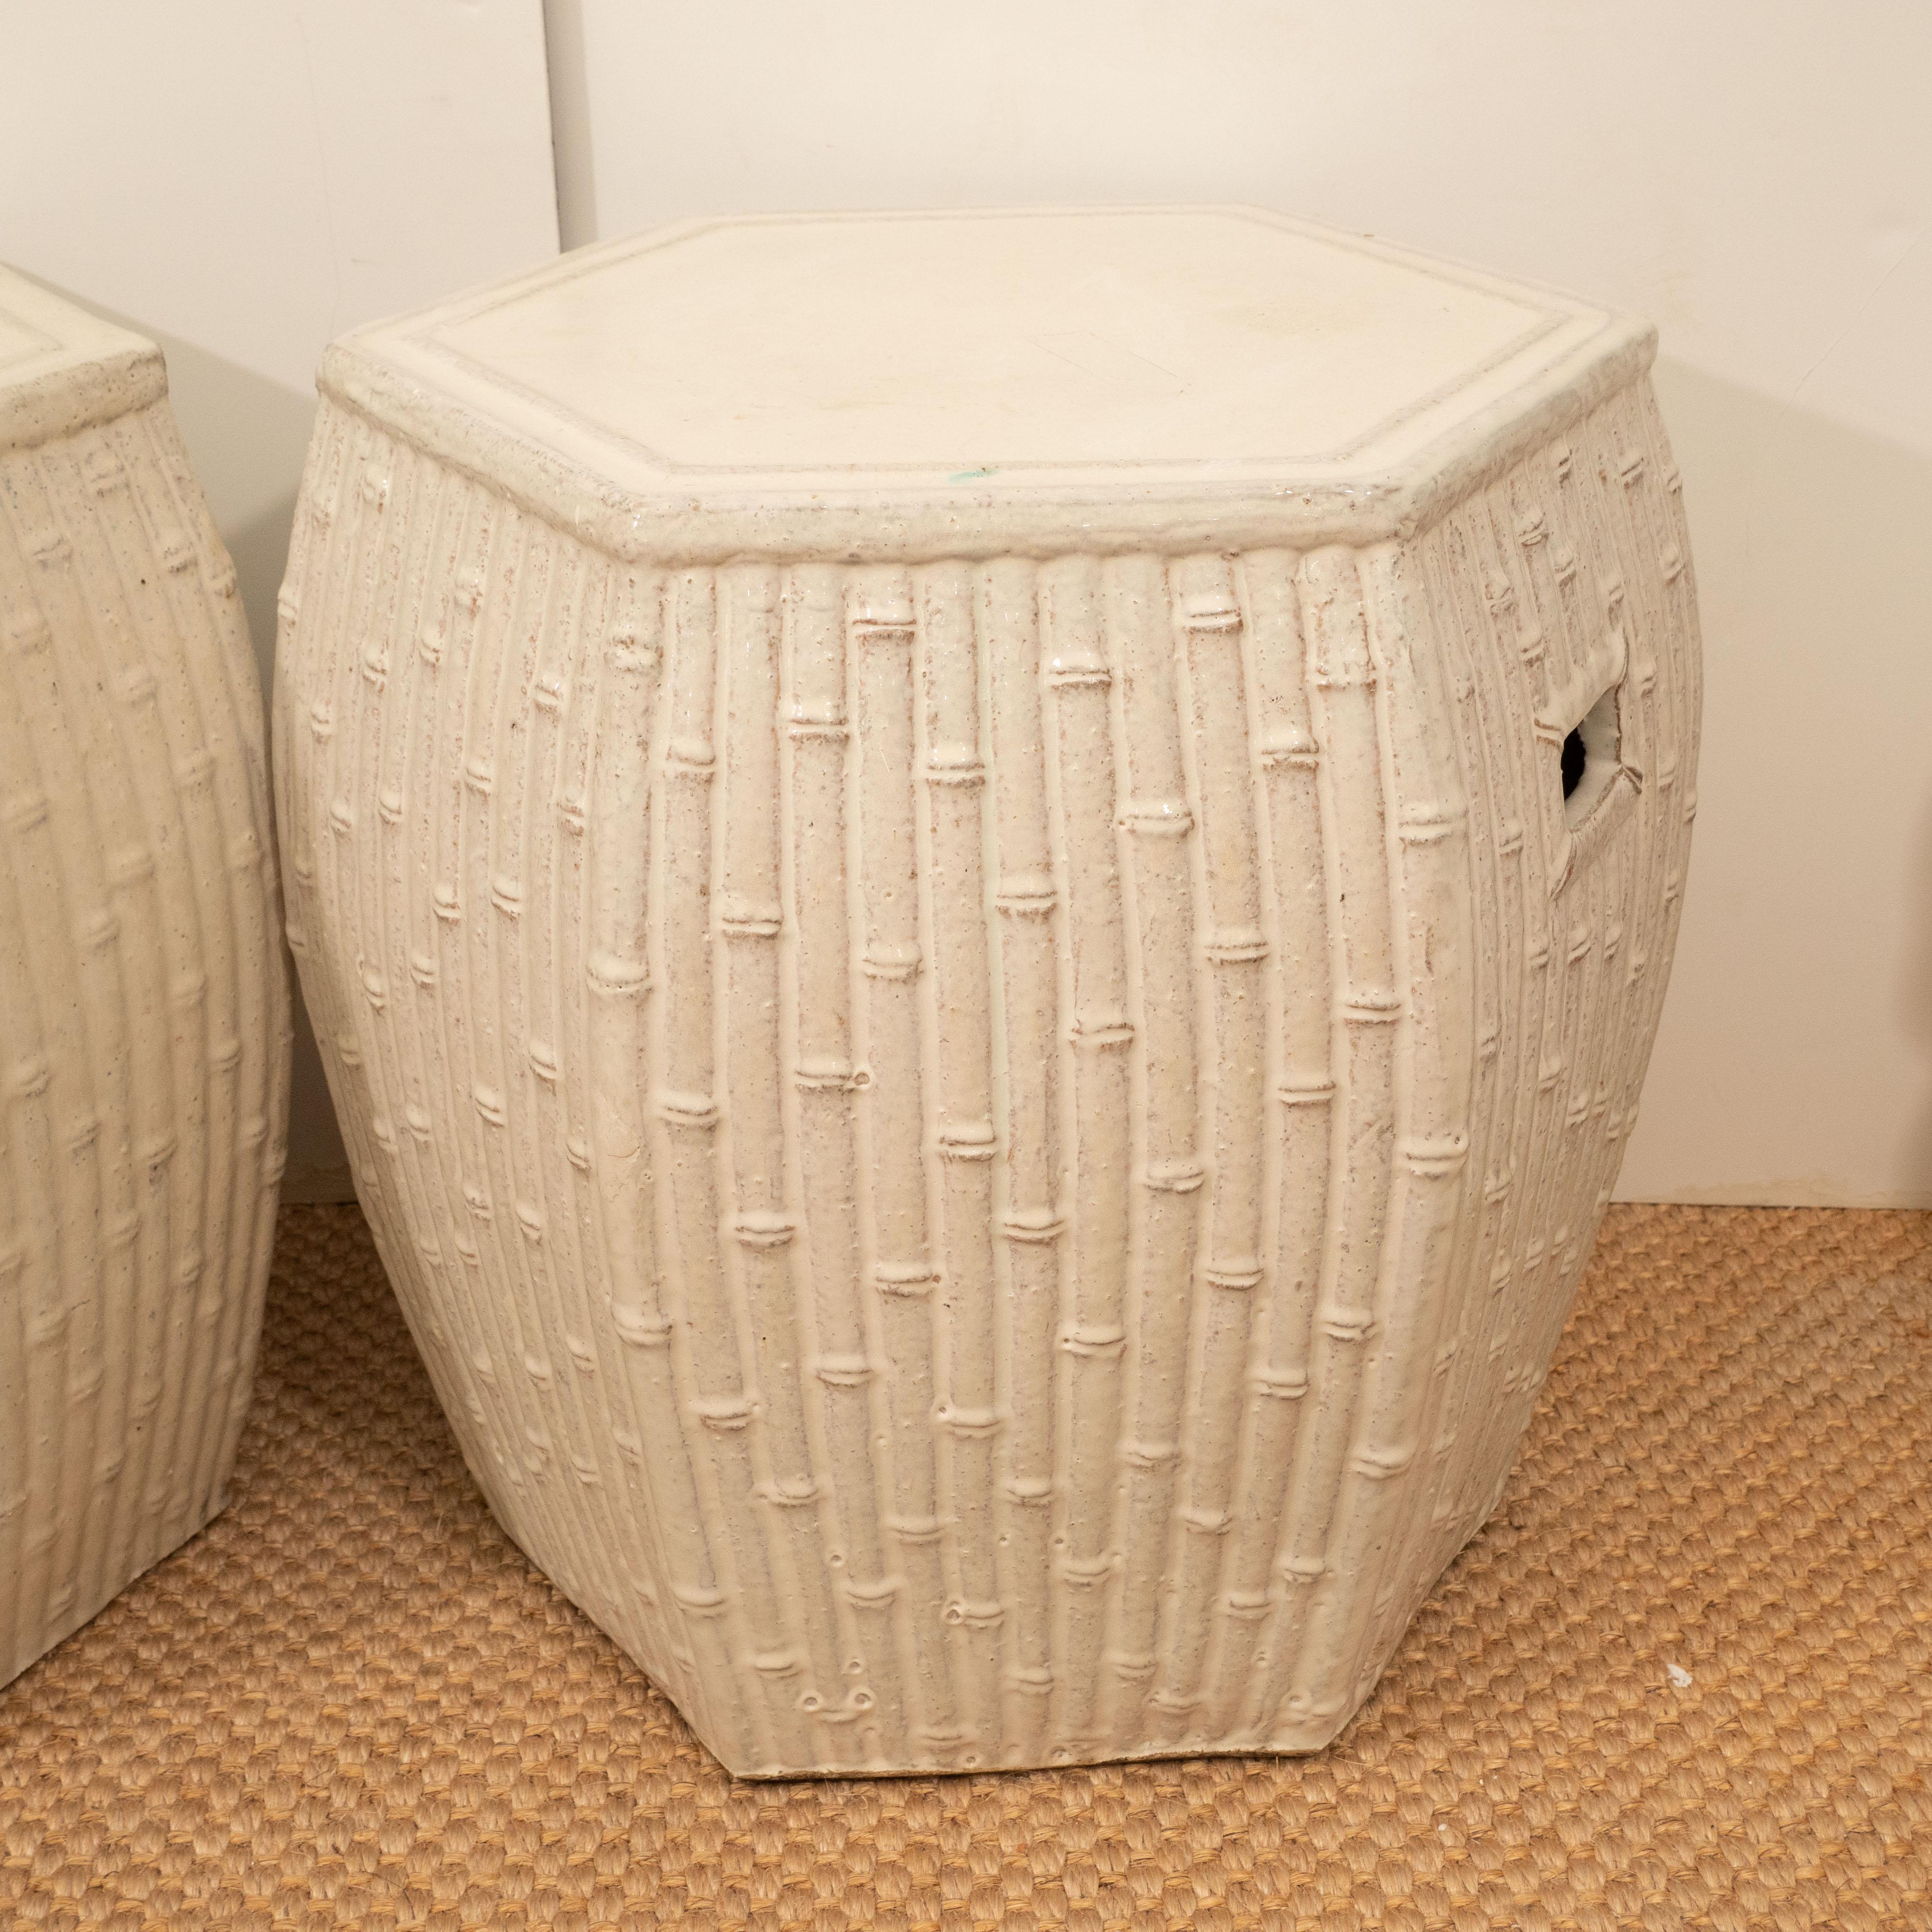 These ceramic garden stools, with their creamy white color, can mix with any color scheme, indoor or outdoor. Their hexagonal shape and bamboo motif make them a unique choice for a side table or seat. Priced individually at $650 each.